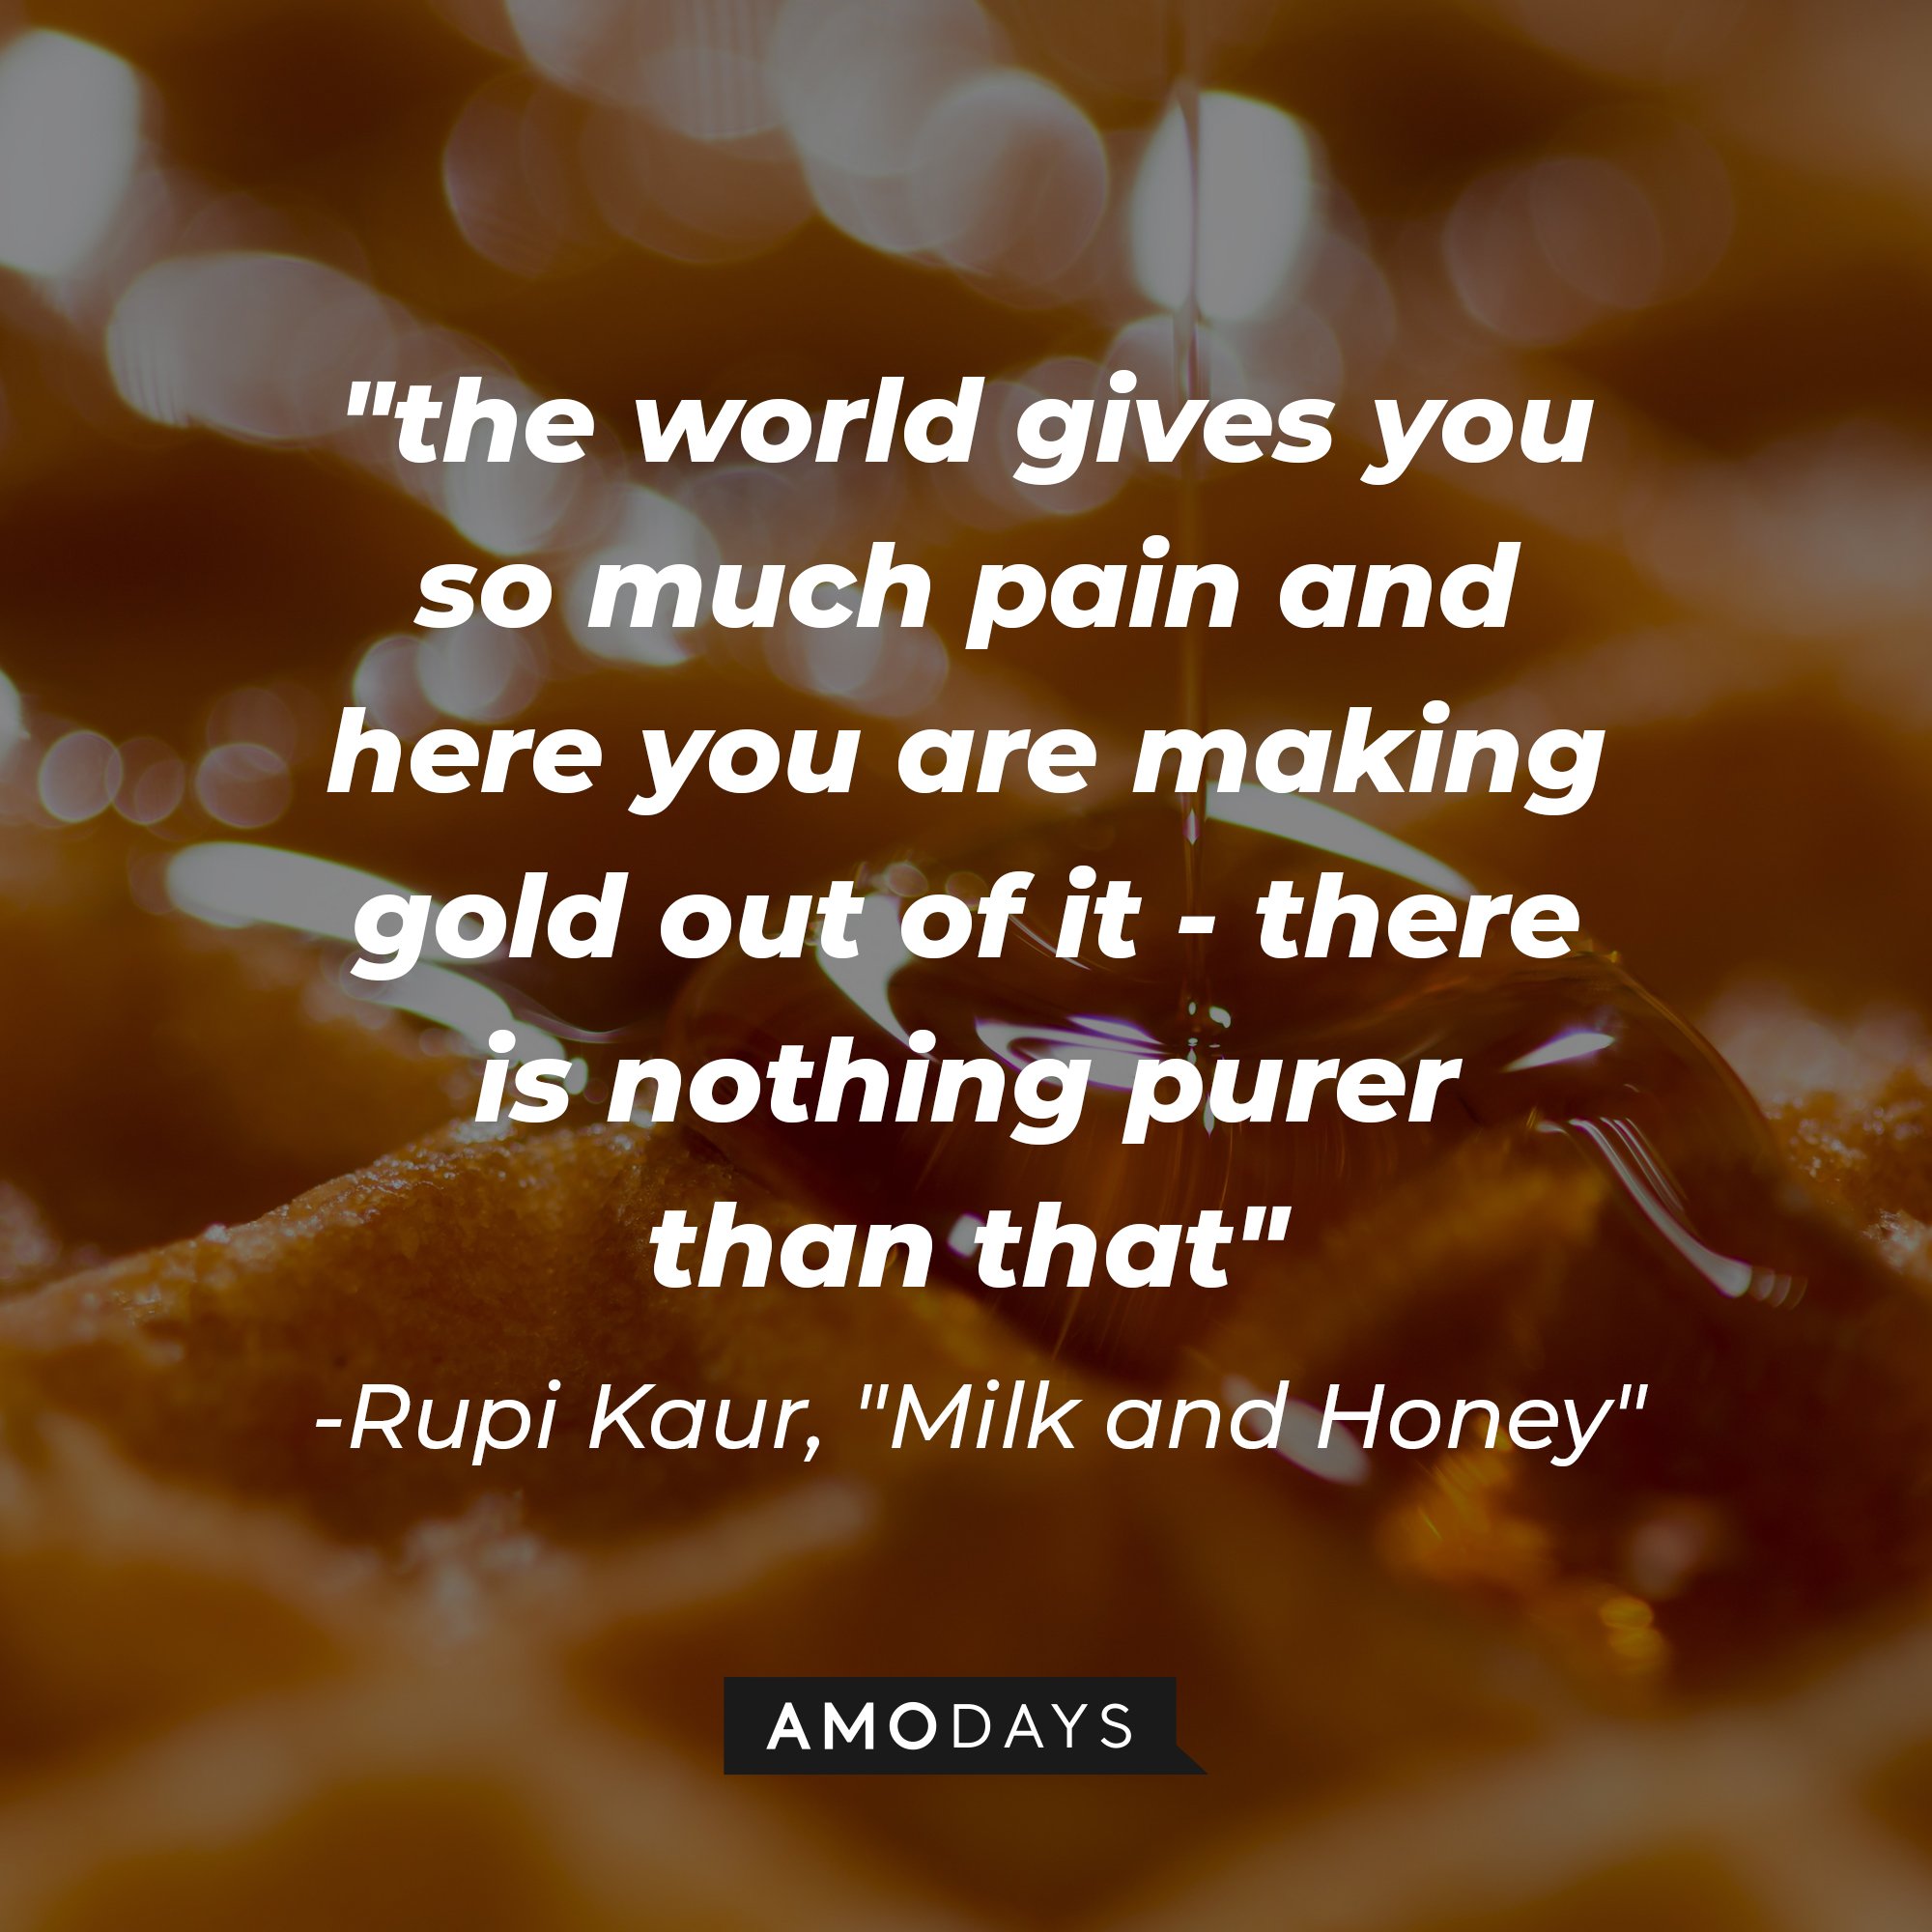 Rupi Kaur's "Milk and Honey" quote: "the world gives you so much pain and here you are making gold out of it - there is nothing purer than that" | Image: AmoDays